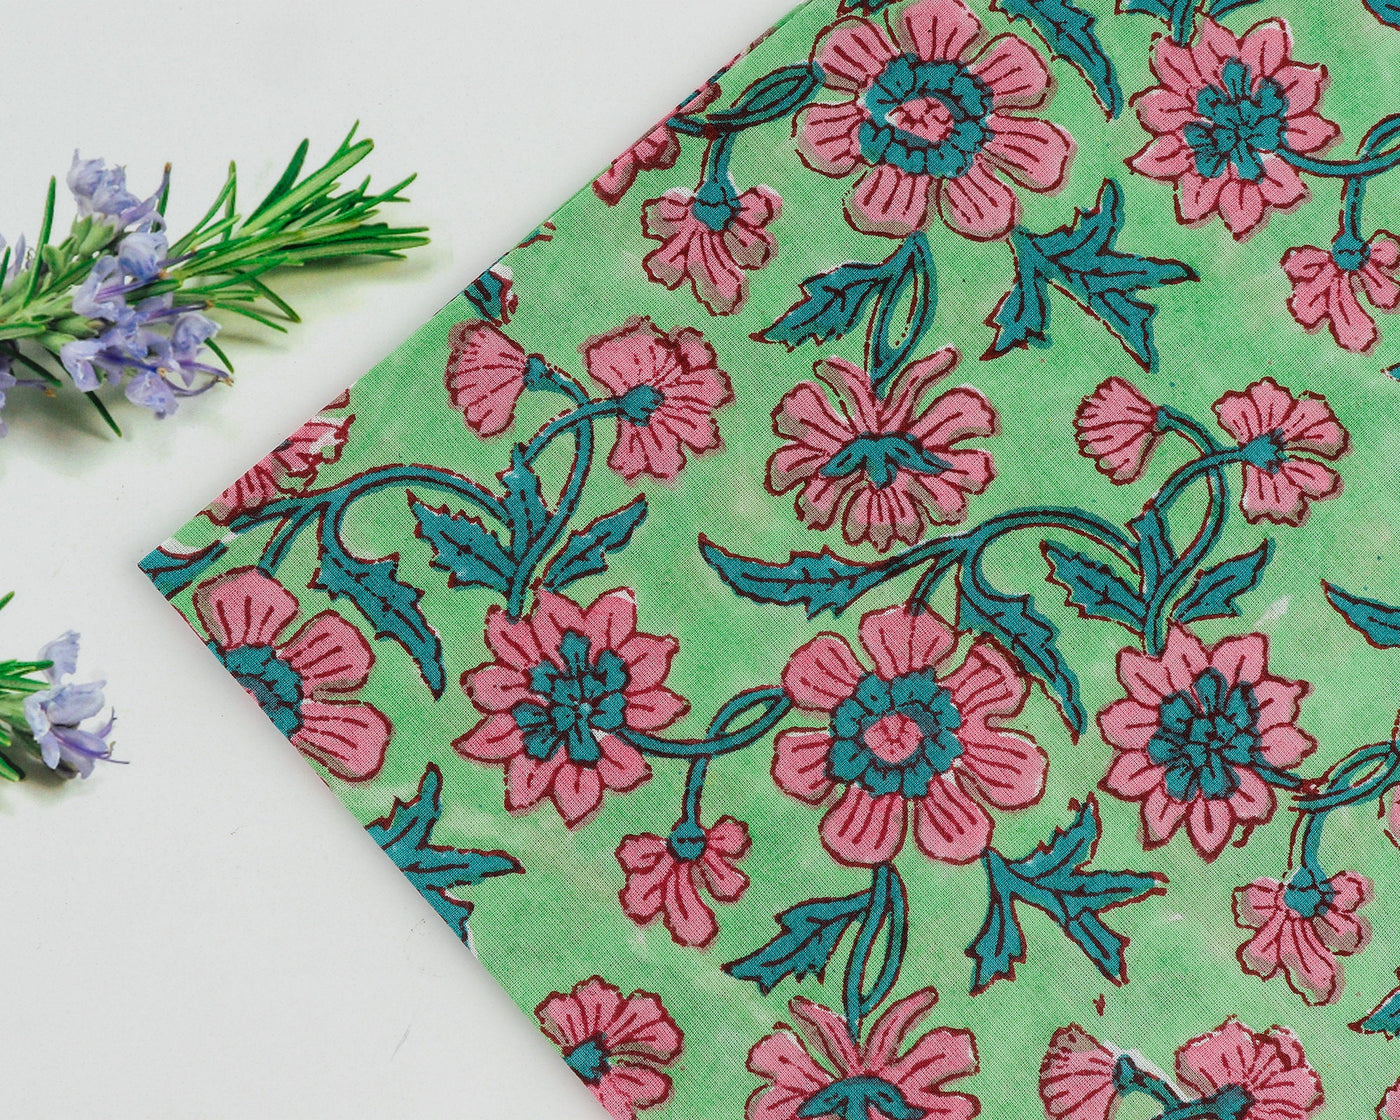 Fabricrush Mint and Pine Green, Salmon Pink Indian Floral Hand Block Printed Pure Cotton Cloth Napkins, 18x18"- Cocktail Napkins, 20x20"- Dinner Napkins